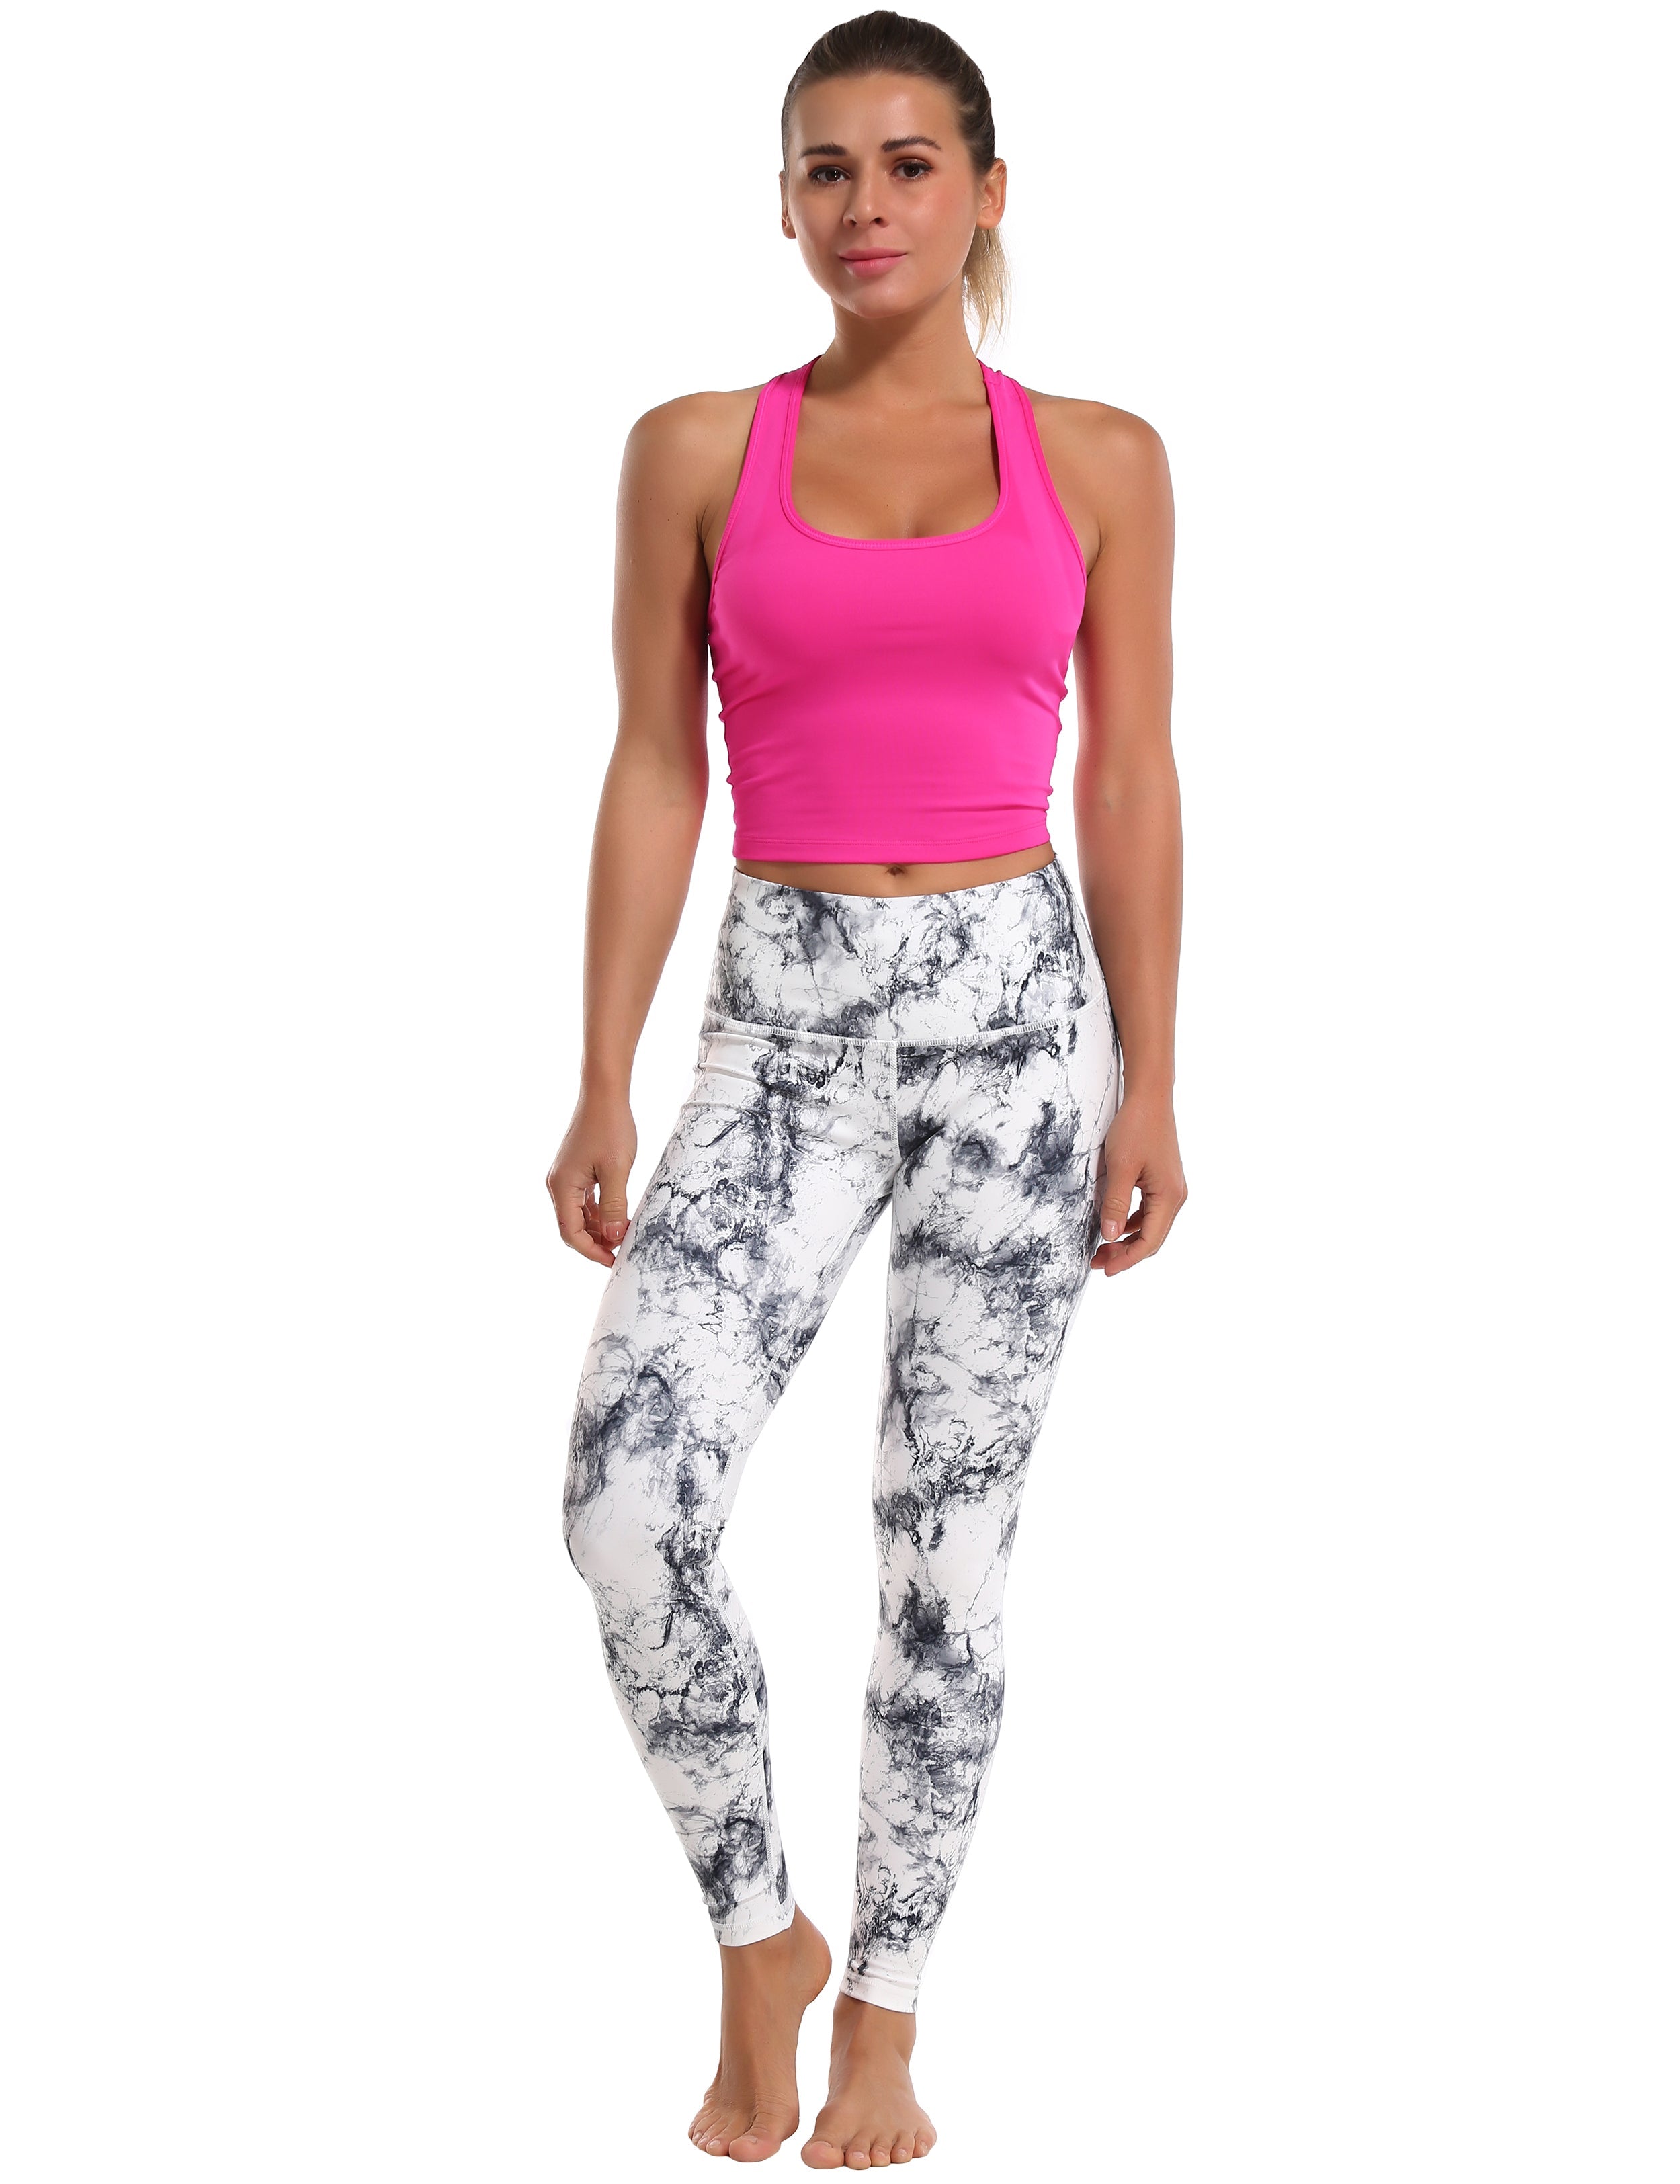 High Waist Jogging Pants arabescato 82%Polyester/18%Spandex Fabric doesn't attract lint easily 4-way stretch No see-through Moisture-wicking Tummy control Inner pocket